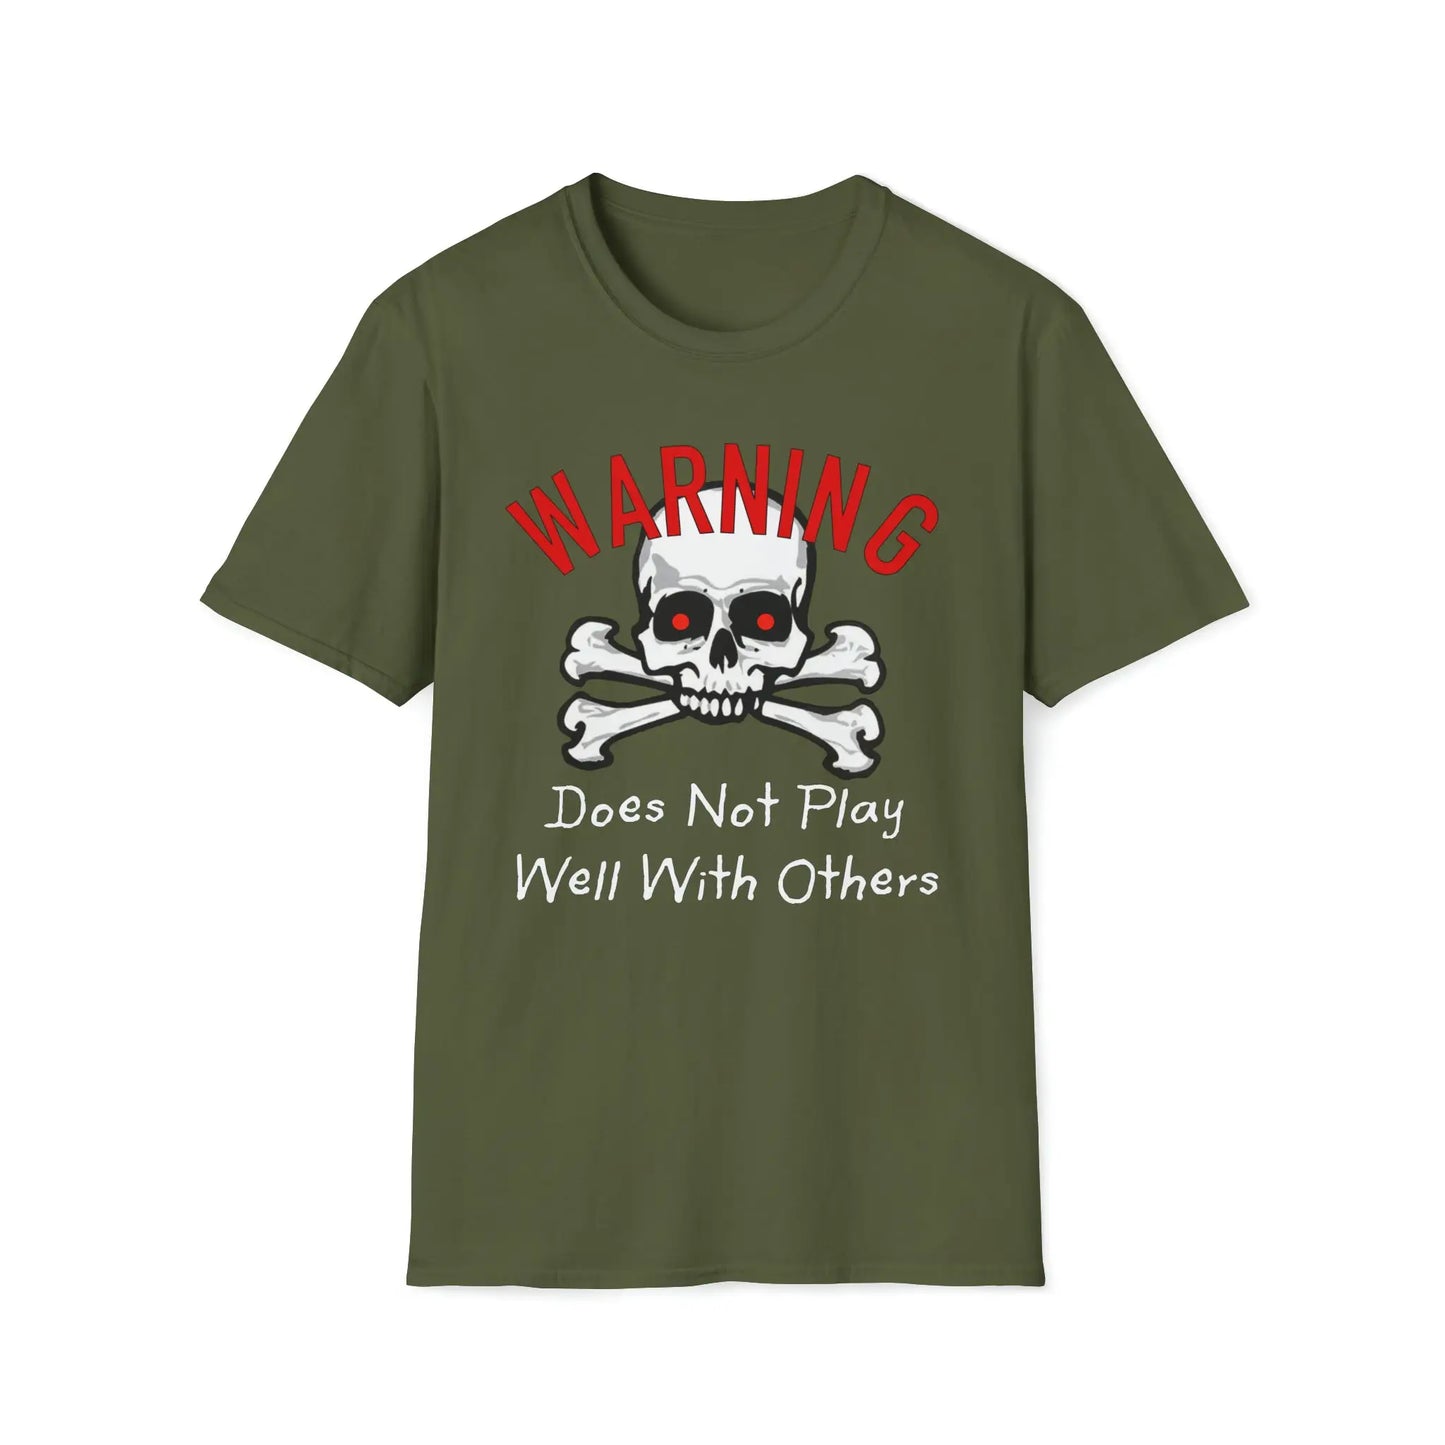 Does Not Play Well With Others Women's Tee - Wicked Tees